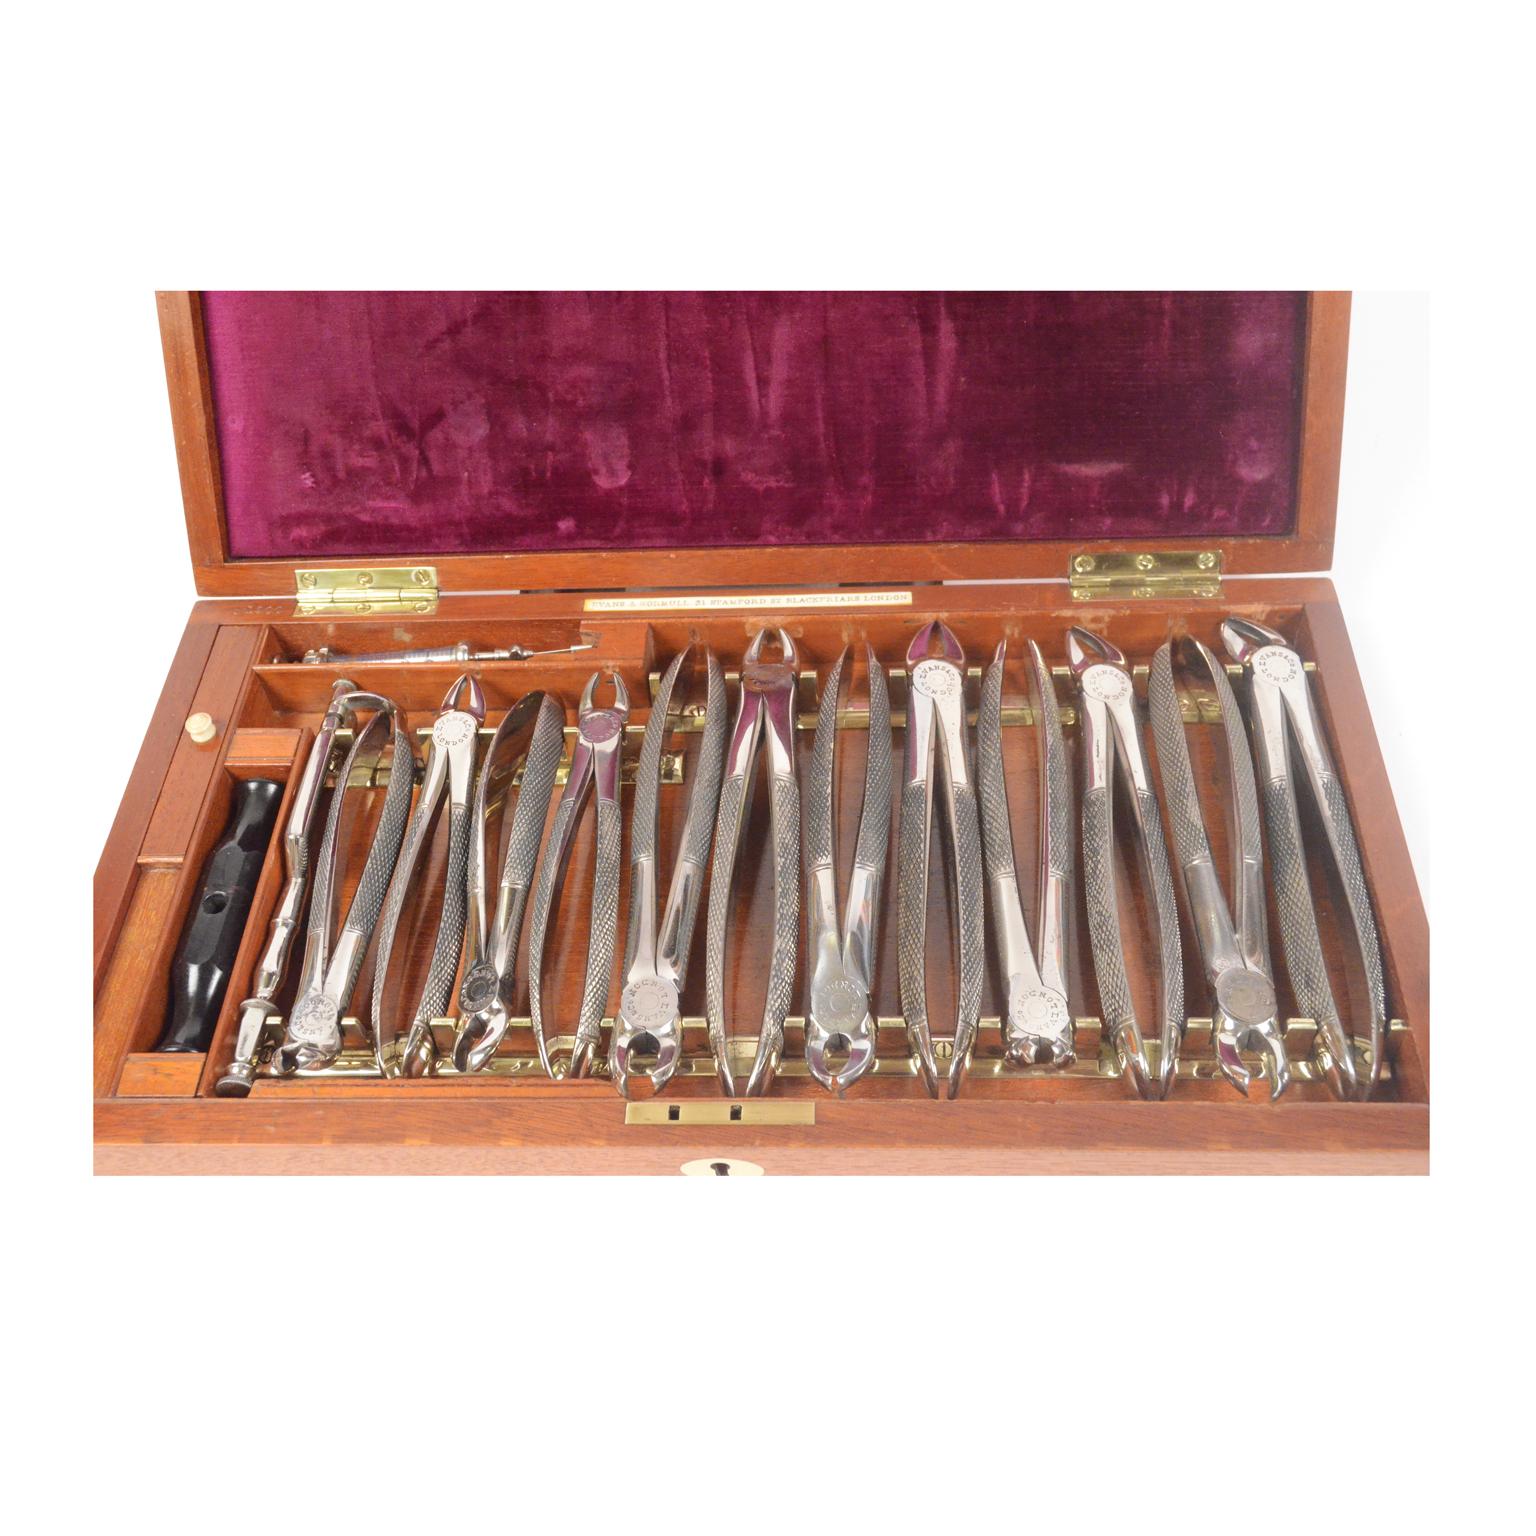 Dentist kit signed Evans & Wormull 31 Stamford, London, circa 1880. This medical set contains 12 pliers, a dental or pelican wrench with spare accessories and a glass syringe with needles. Steel instruments, mahogany box with brass hinges and